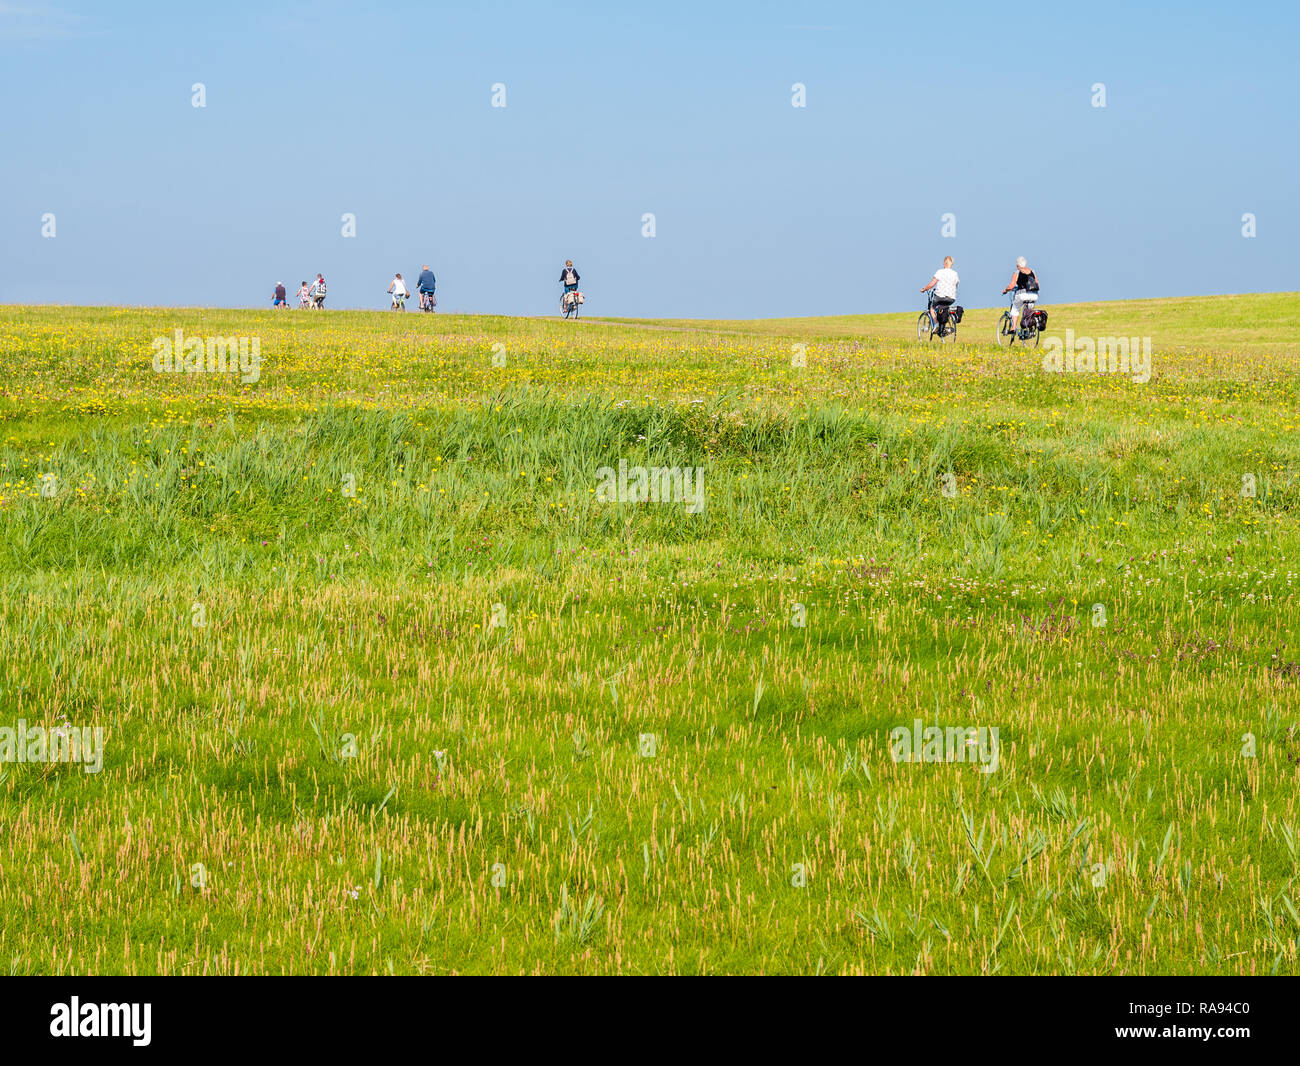 Group of bicyclists riding bikes on dike with grass field on a sunny day with blue sky, Schiermonnikoog, Netherlands Stock Photo